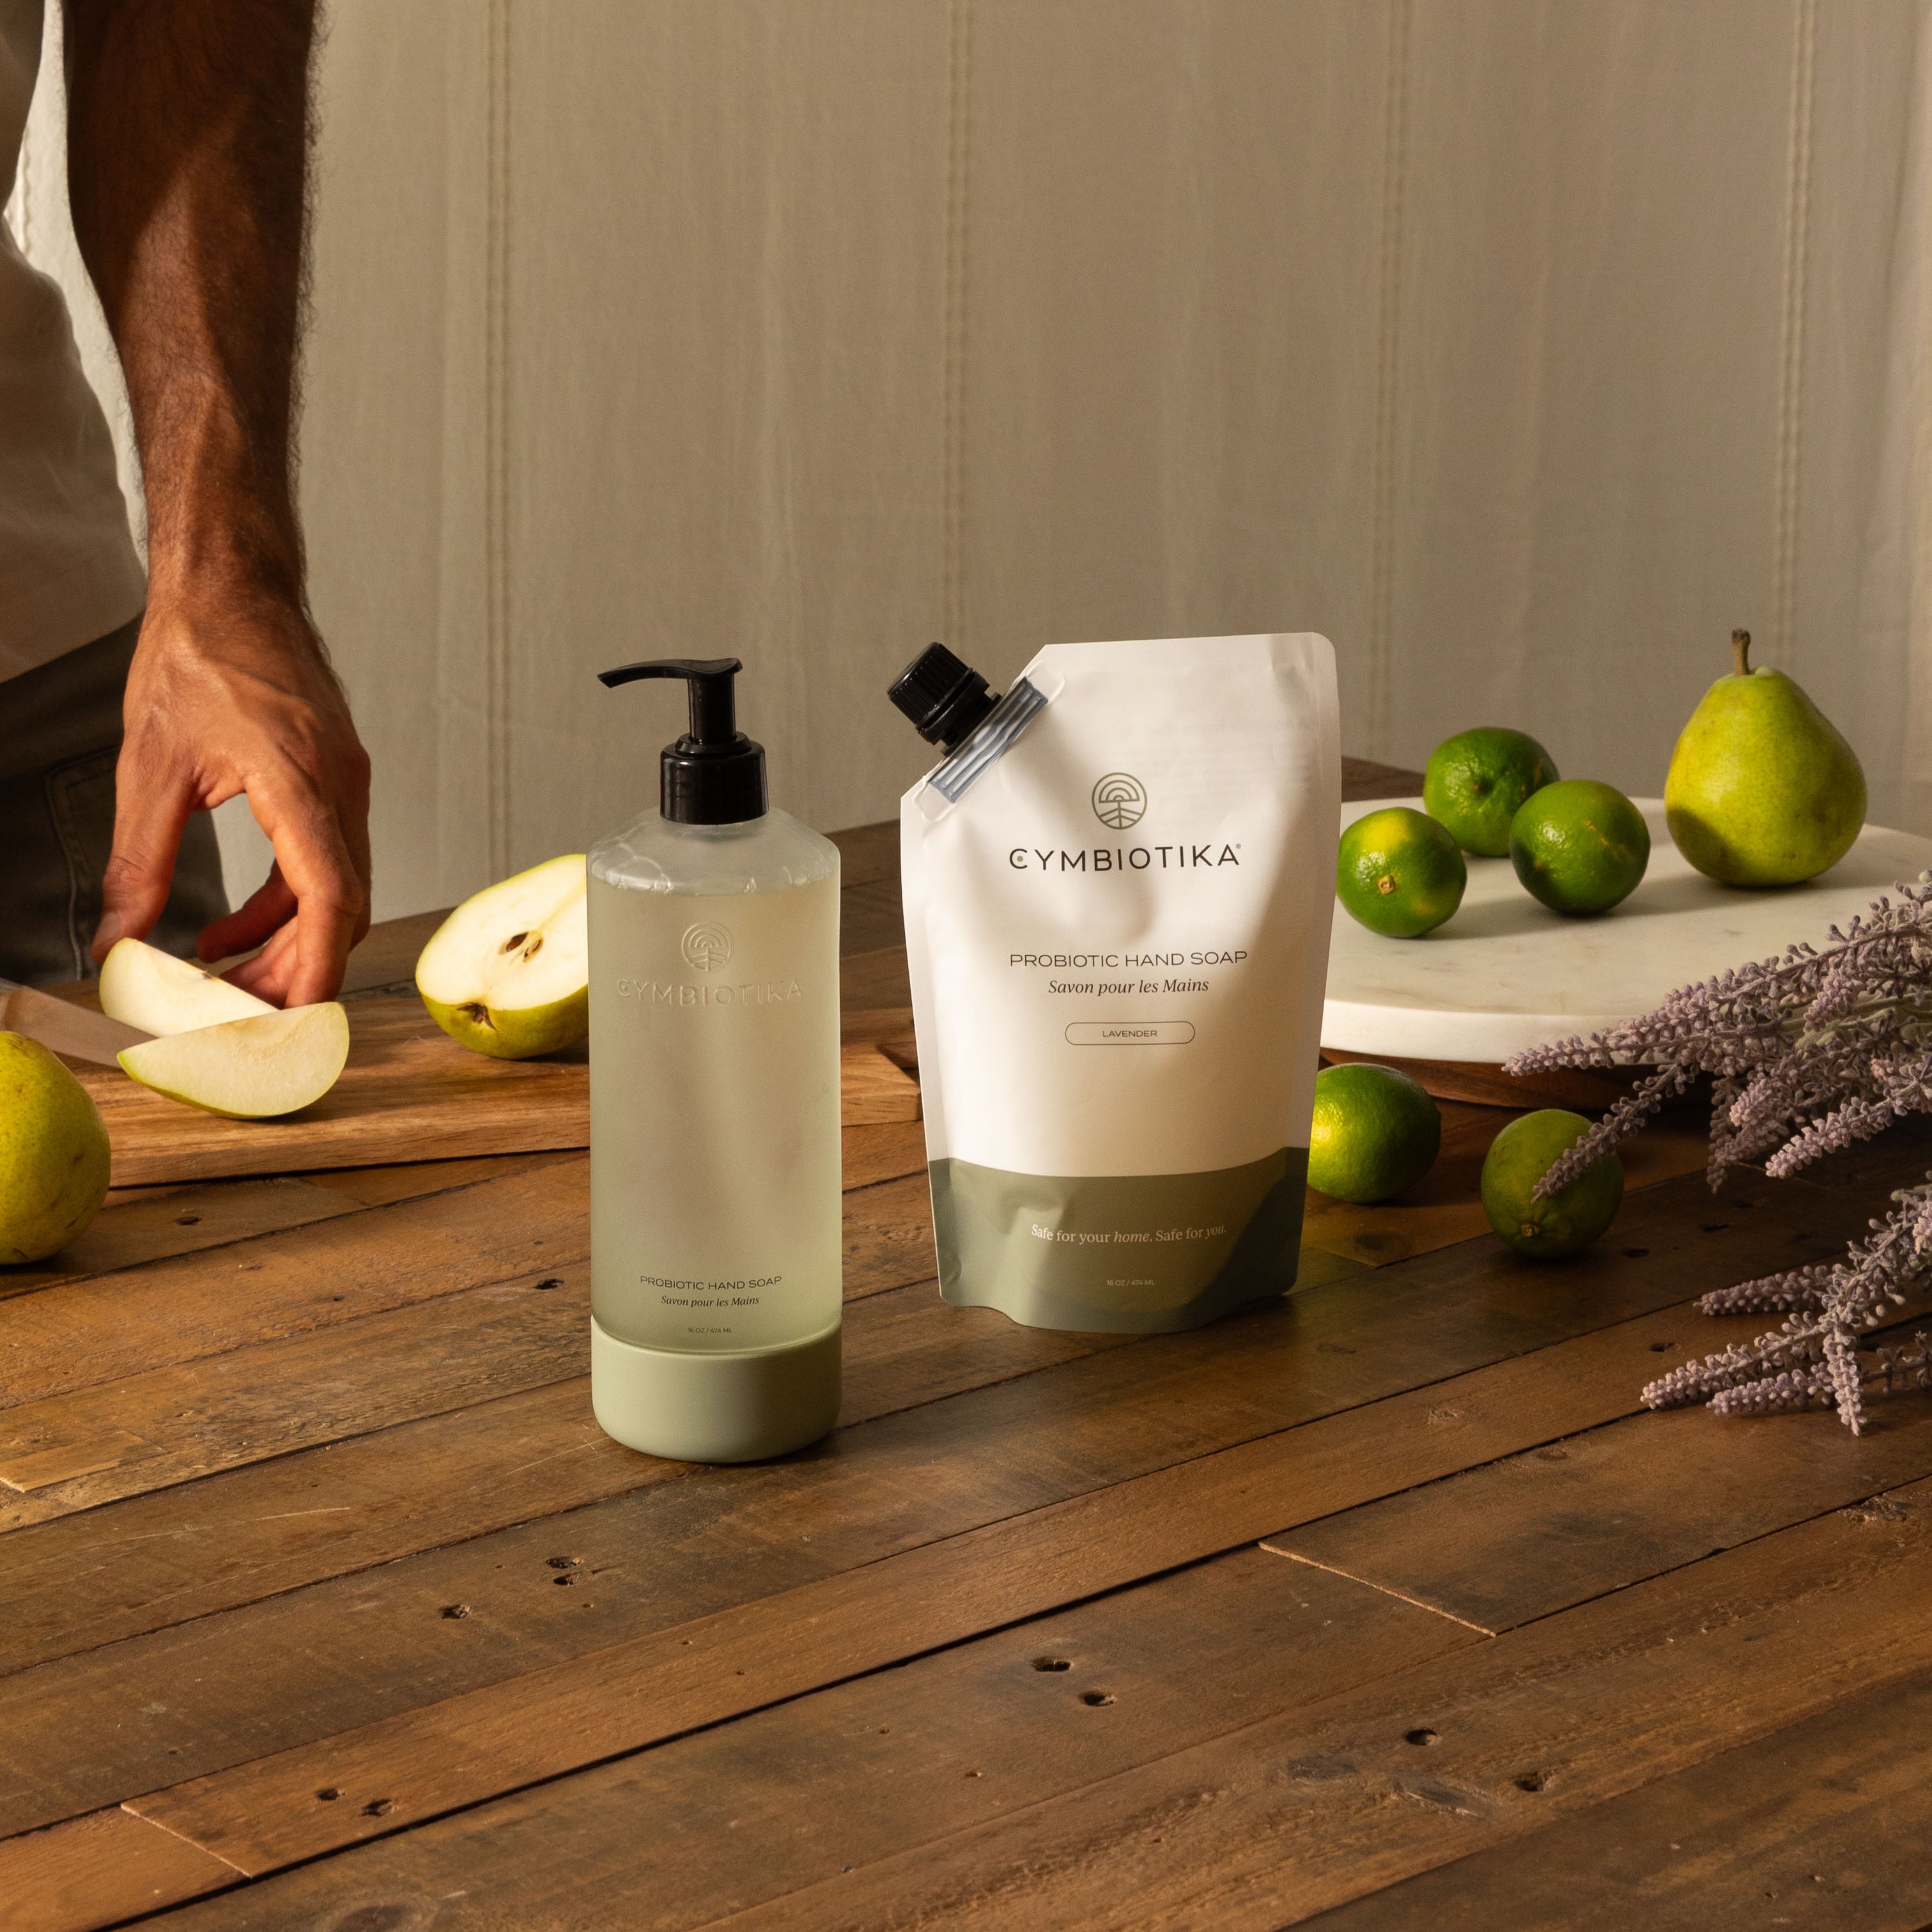 Probiotic Hand Soap Kit Next to Pear Being Cut